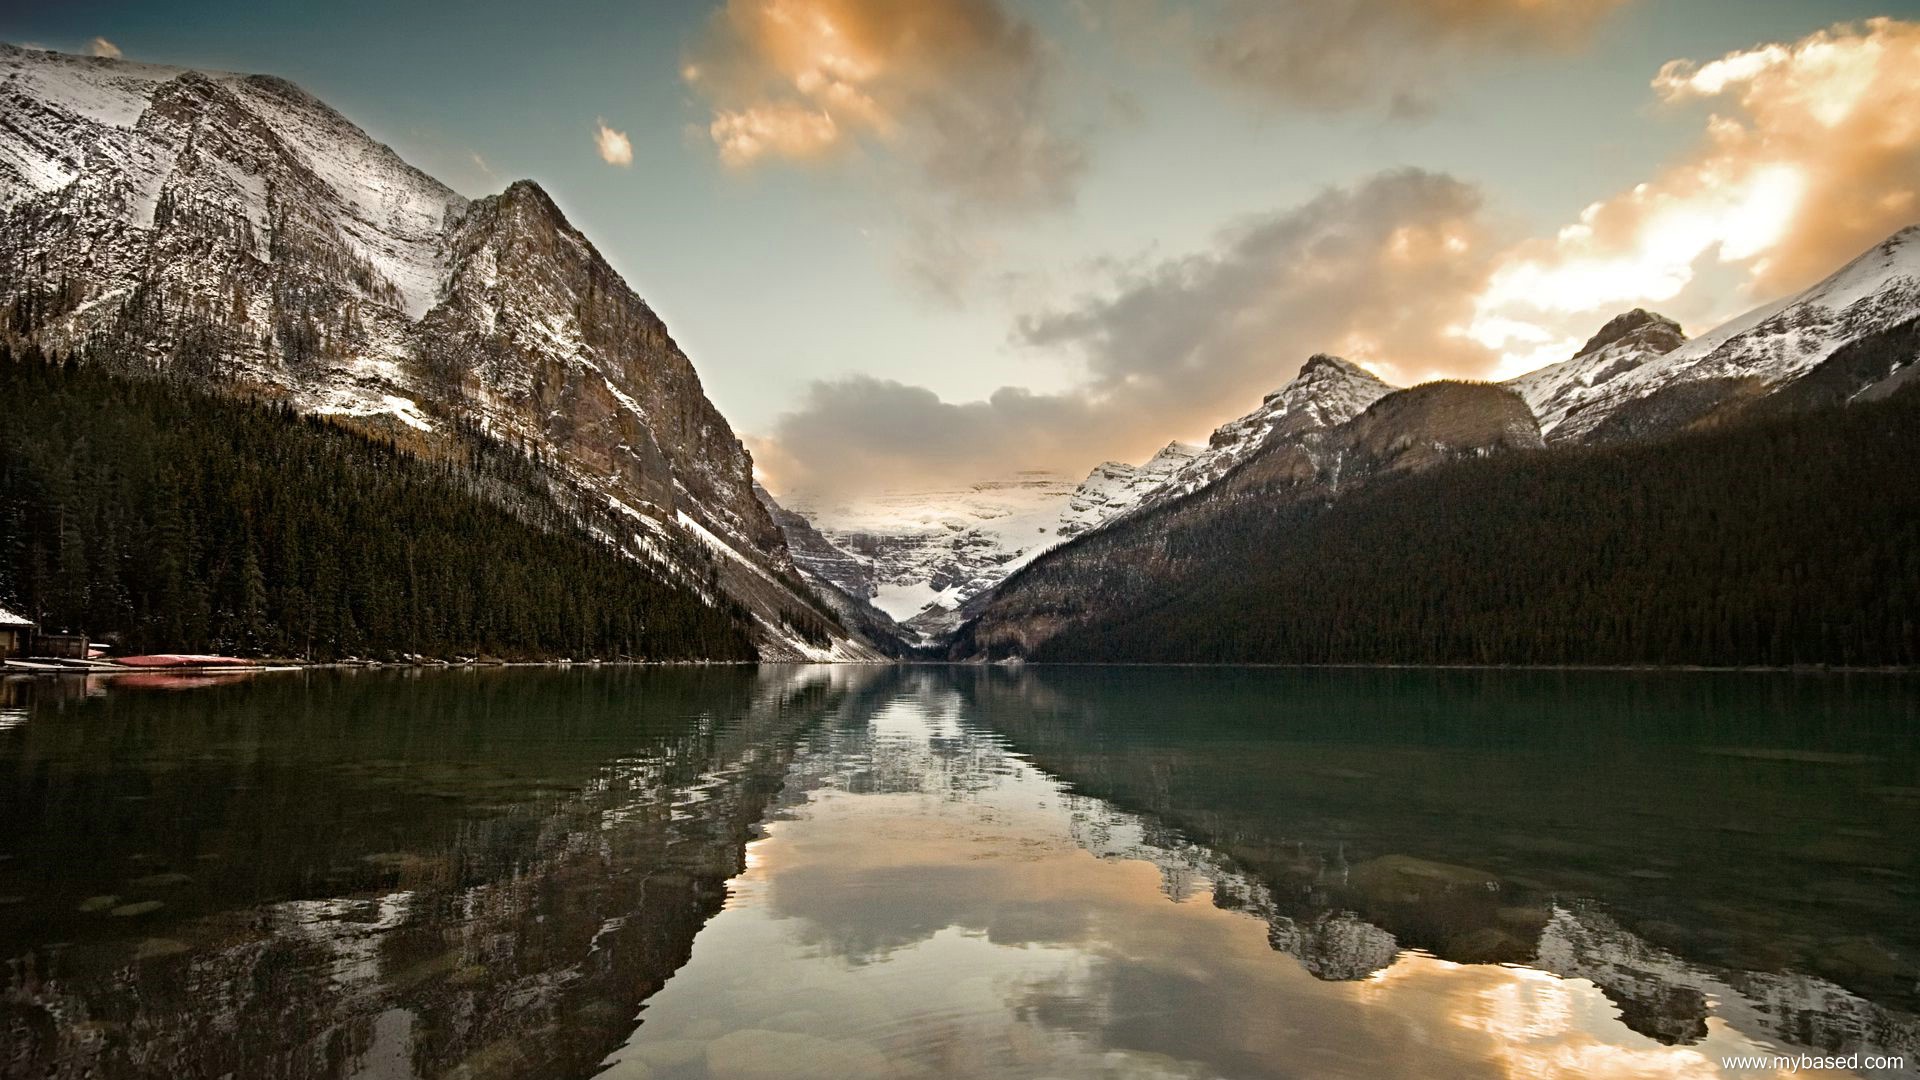 General 1920x1080 mountains lake snow Lake Louise Canada landscape nature water clouds reflection